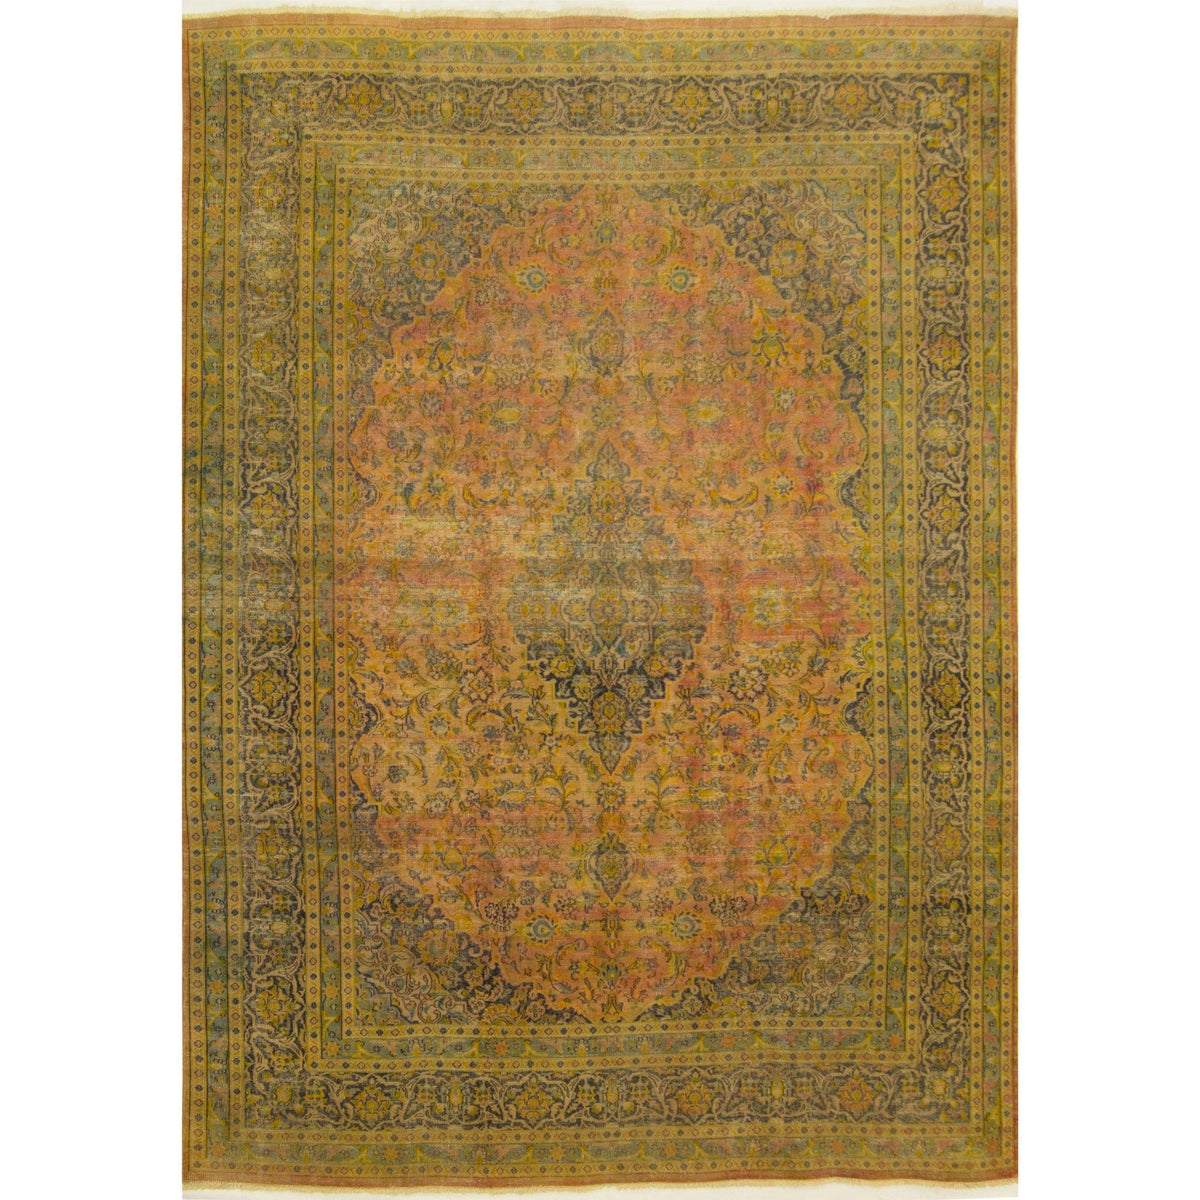 Over-dyed Vintage Persian Rug 243cm x 300cm